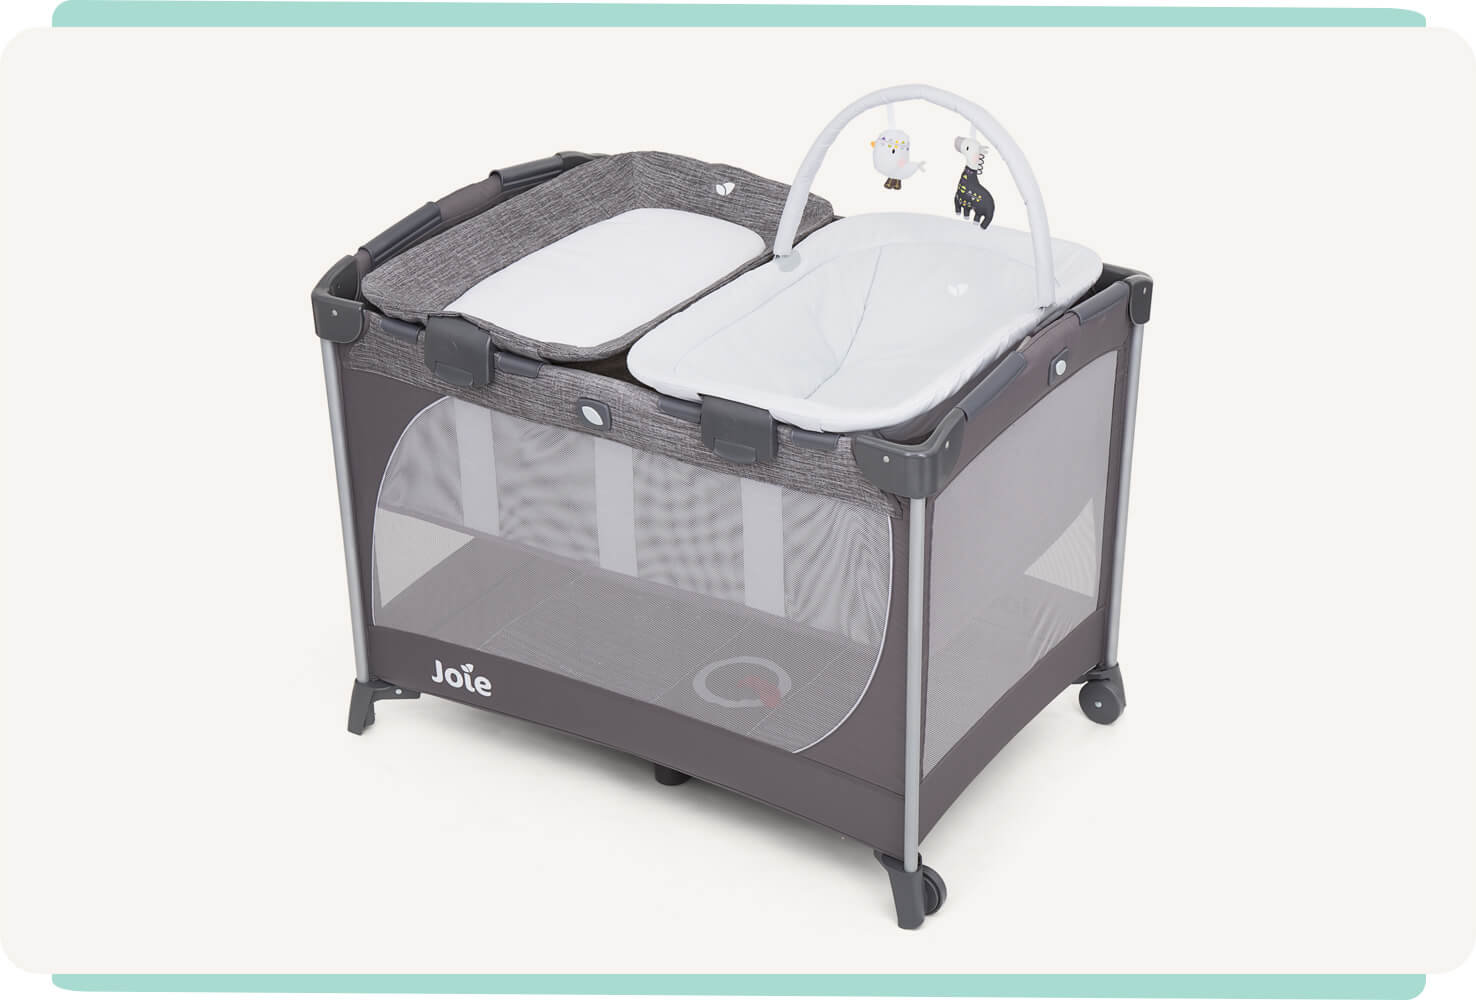 Joie travel cot commuter change & snoozer in grey with bassinet, changer, and snoozing seat at a right angle.